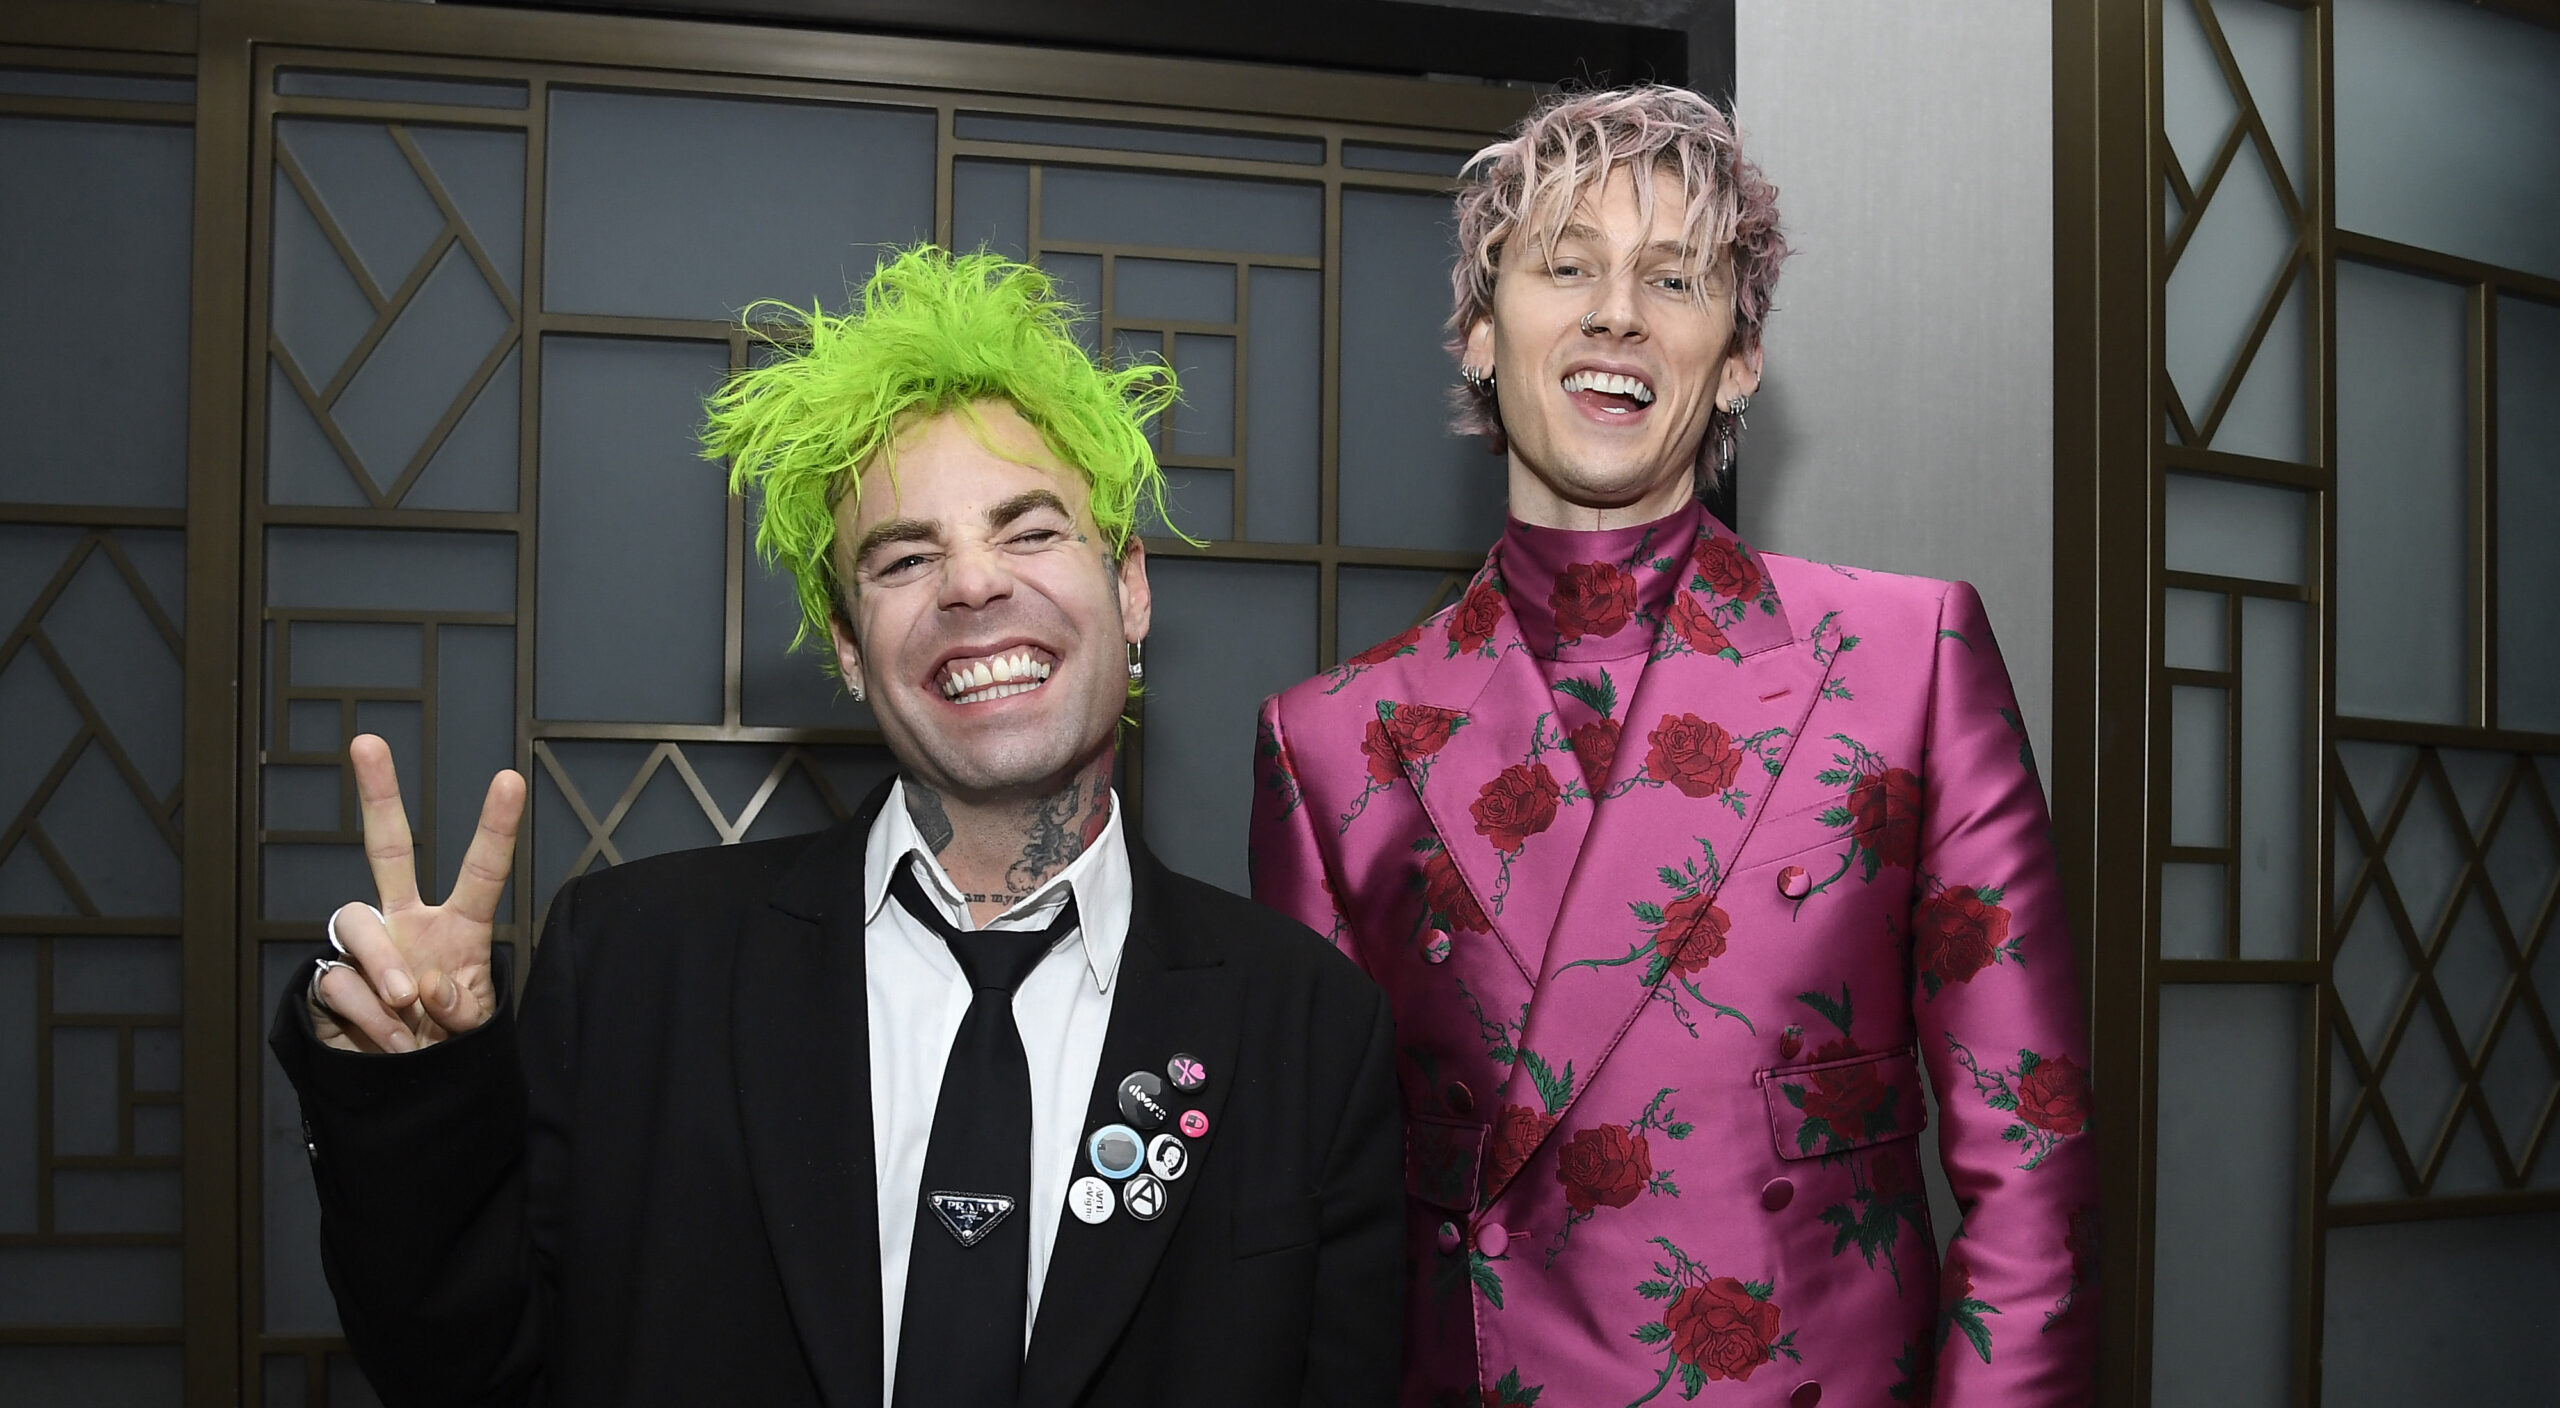 Machine Gun Kelly and Mod Sun named ‘Worse Directors’ at the Razzies